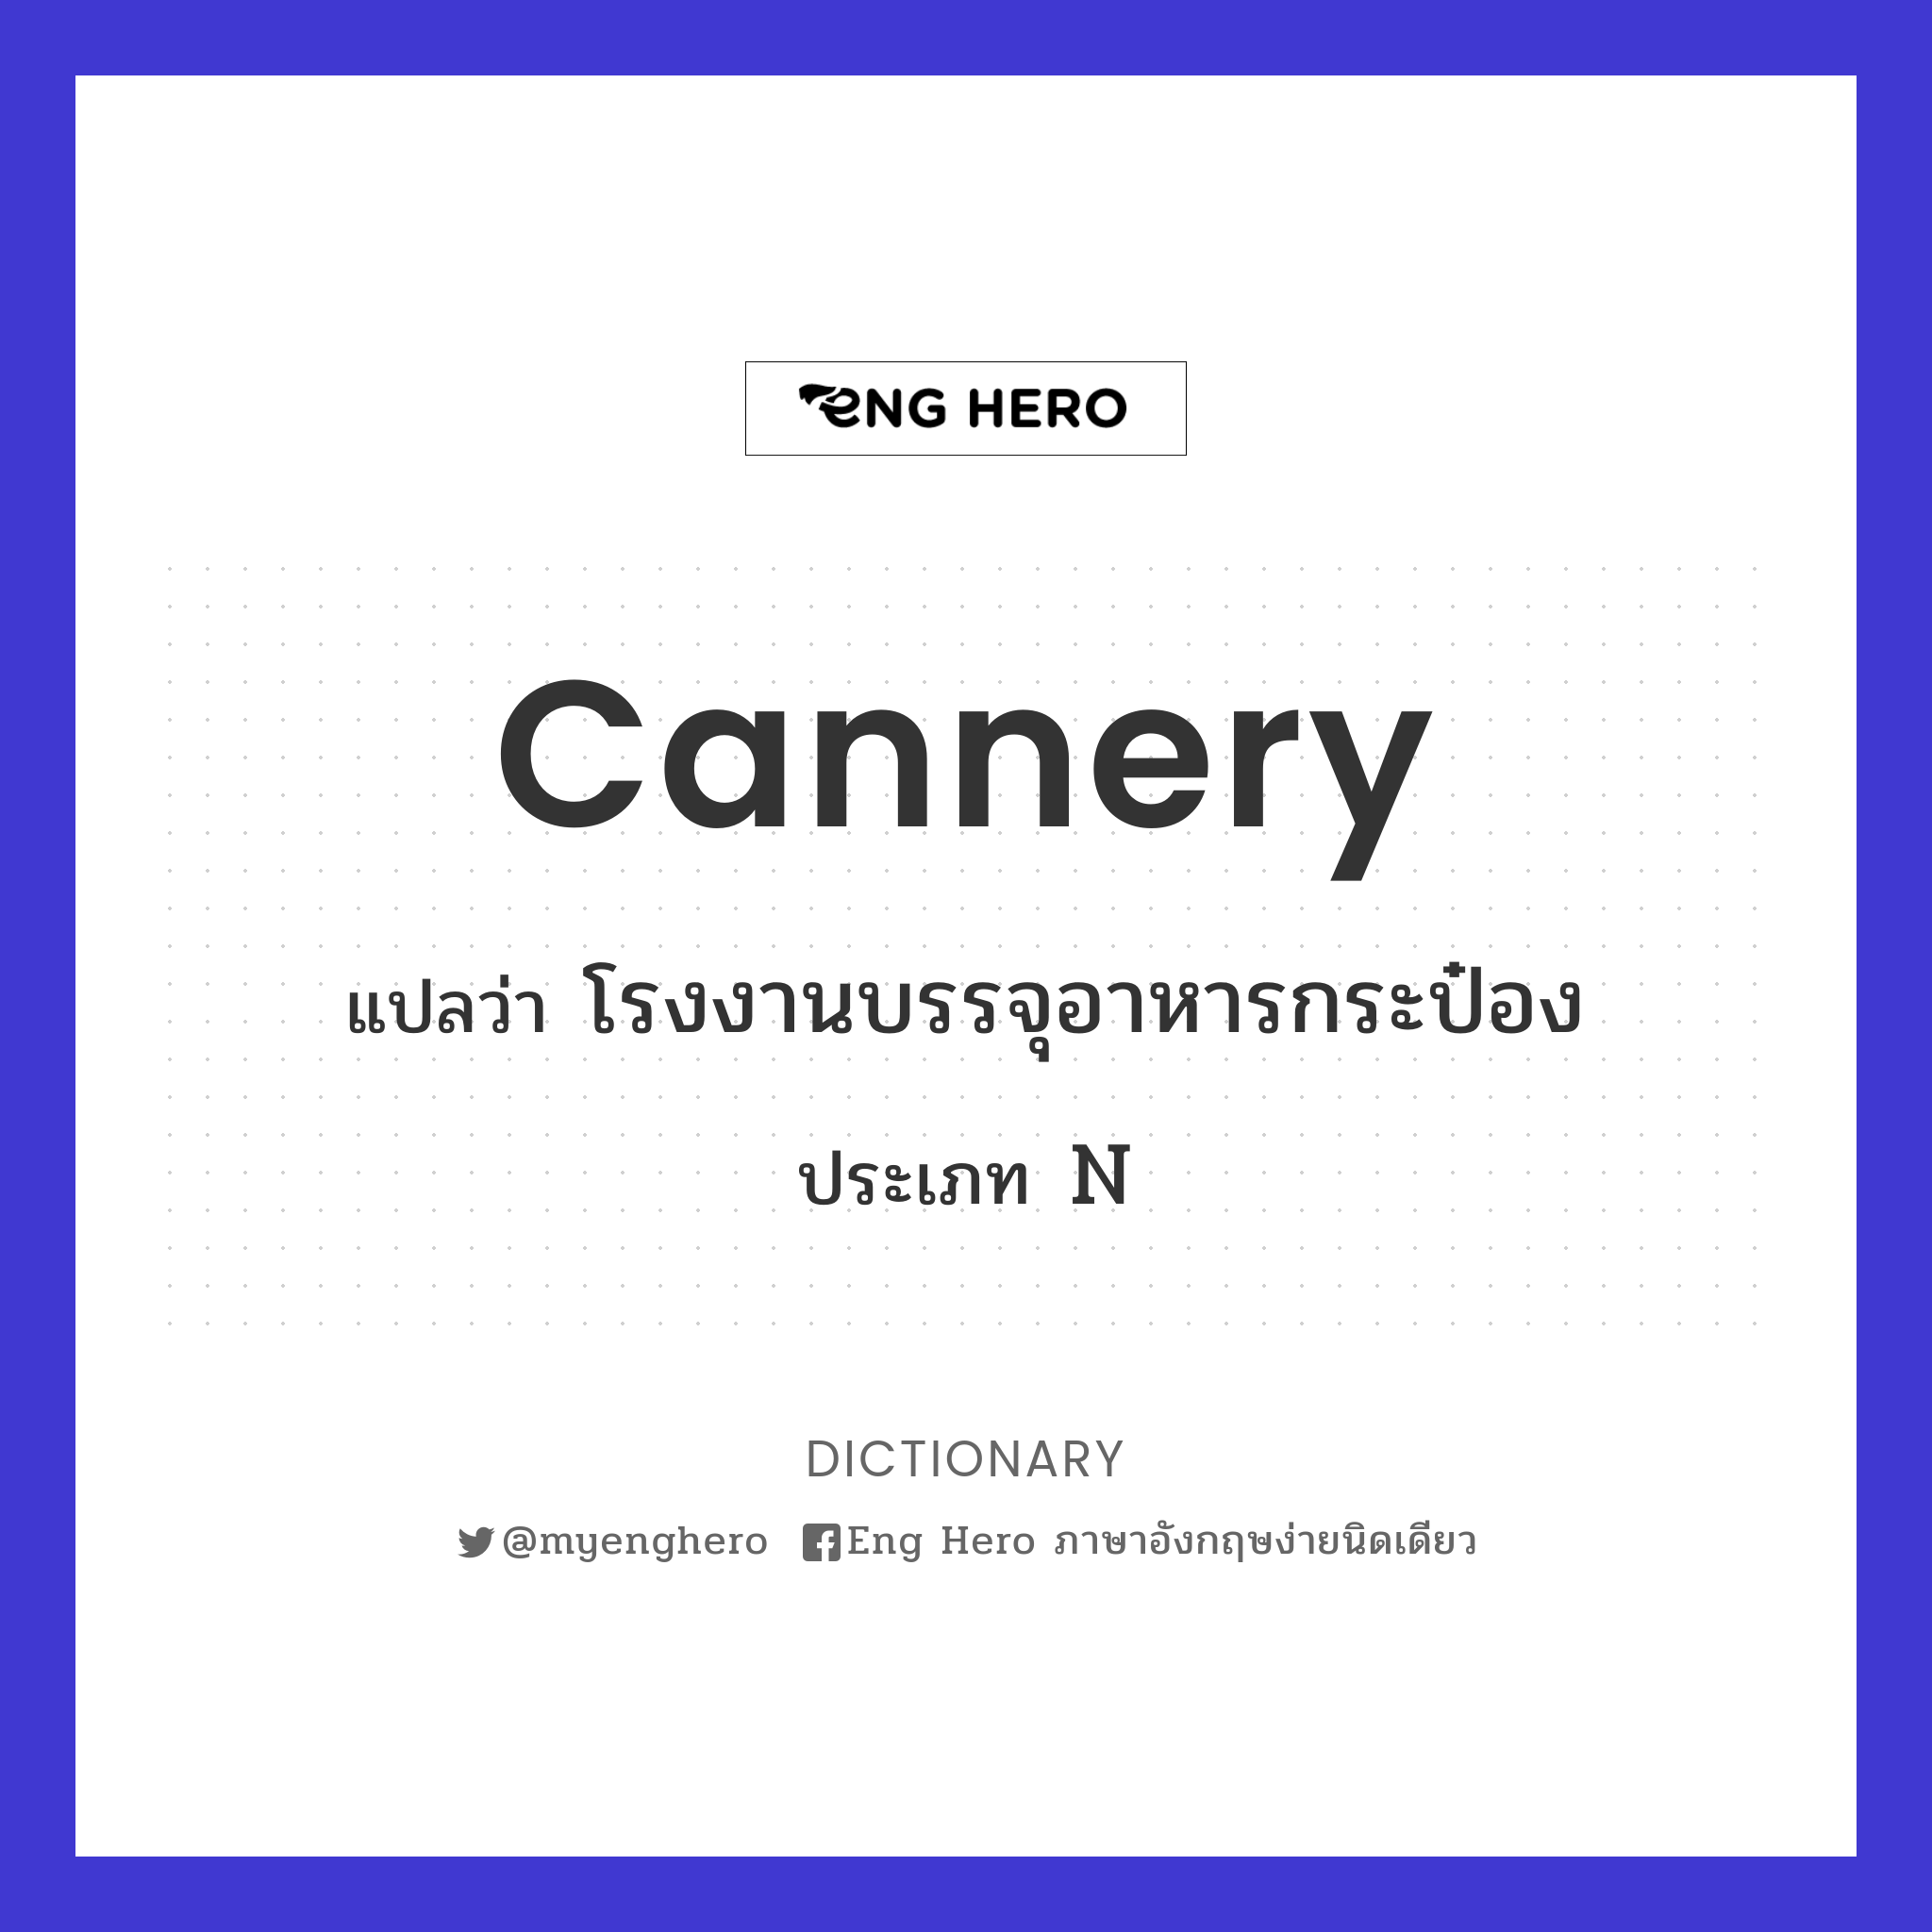 cannery